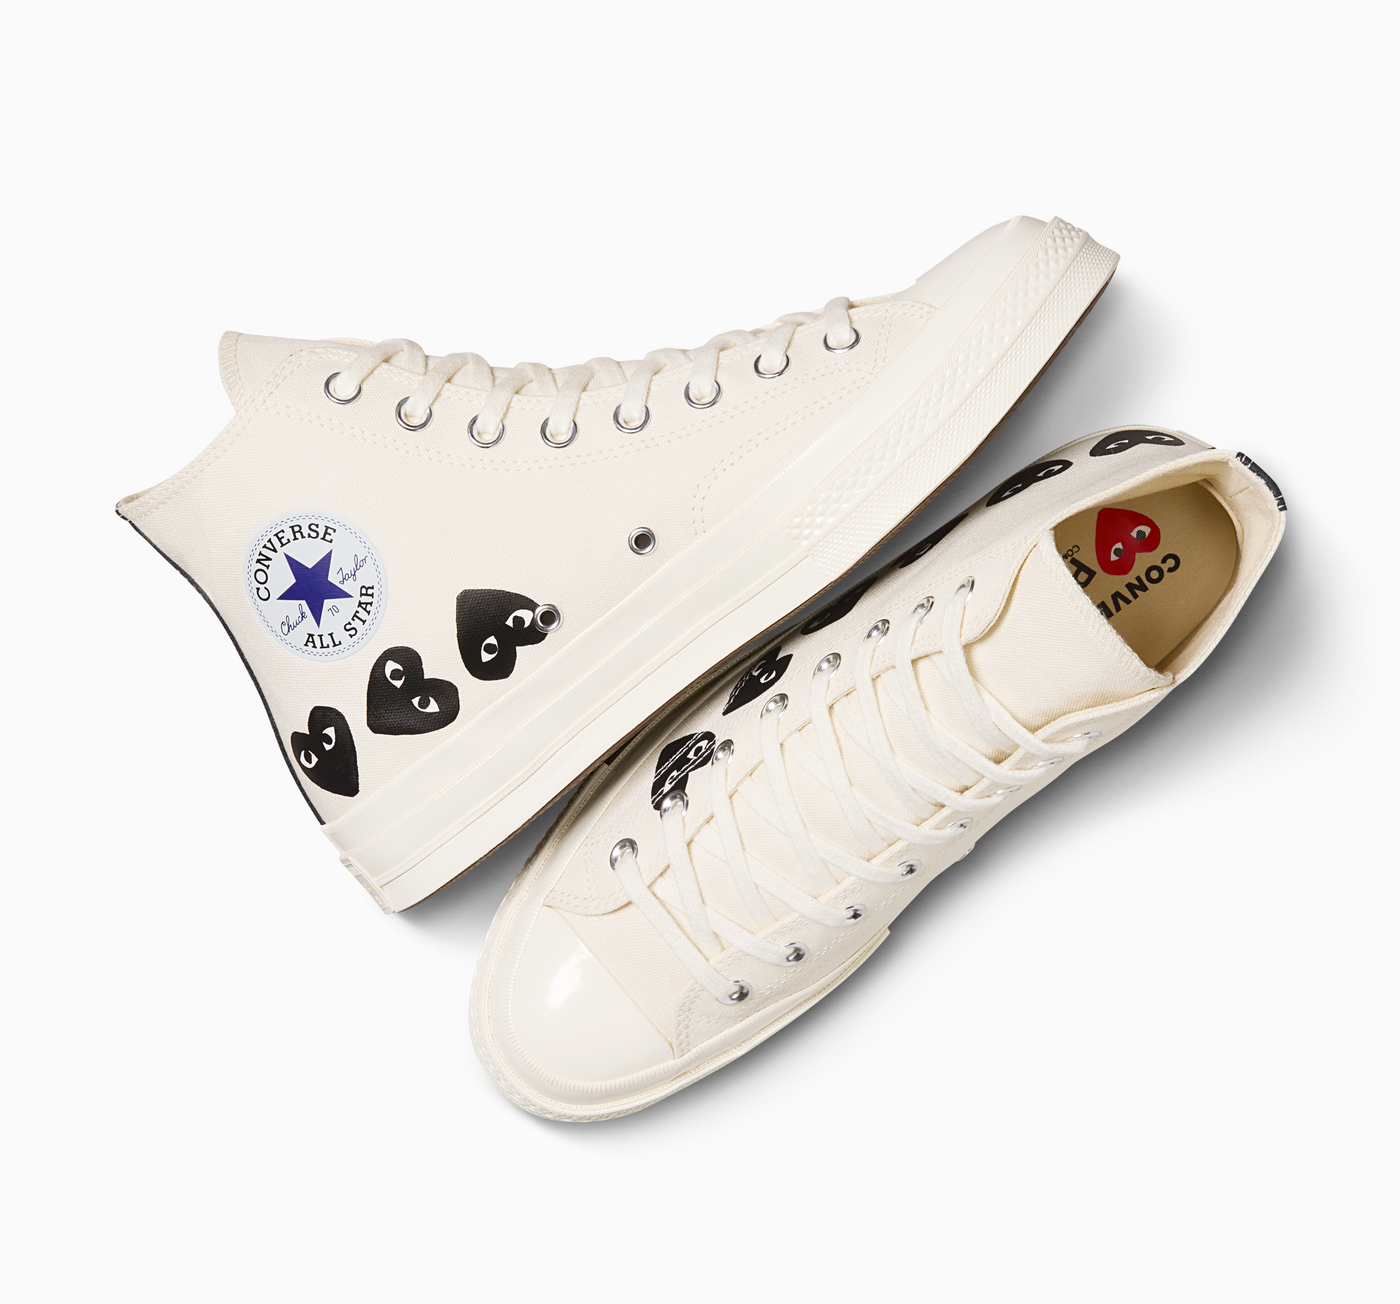 Multi Black Heart Chuck Taylor All Star '70 High Sneakers (White)